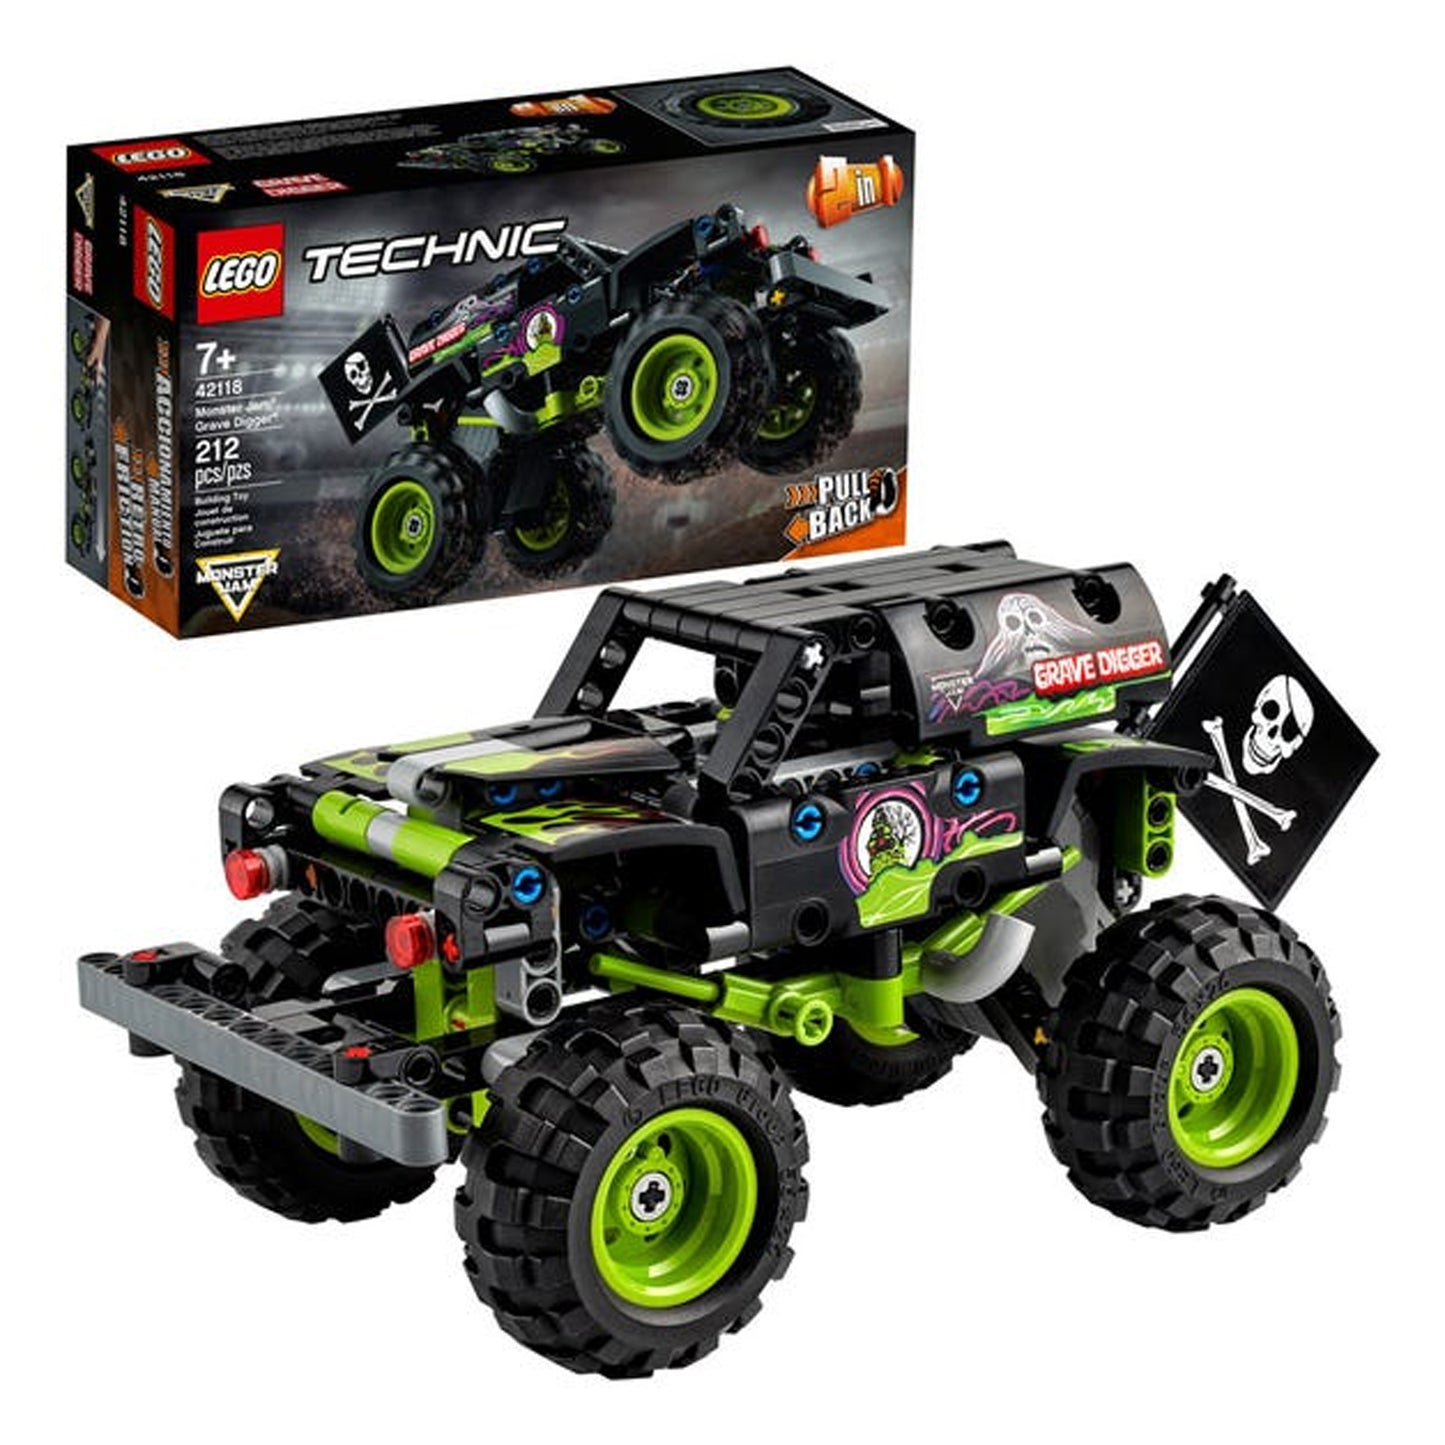 Lego Techinic Monster Jam Grave Digger 42118 - Crazygames